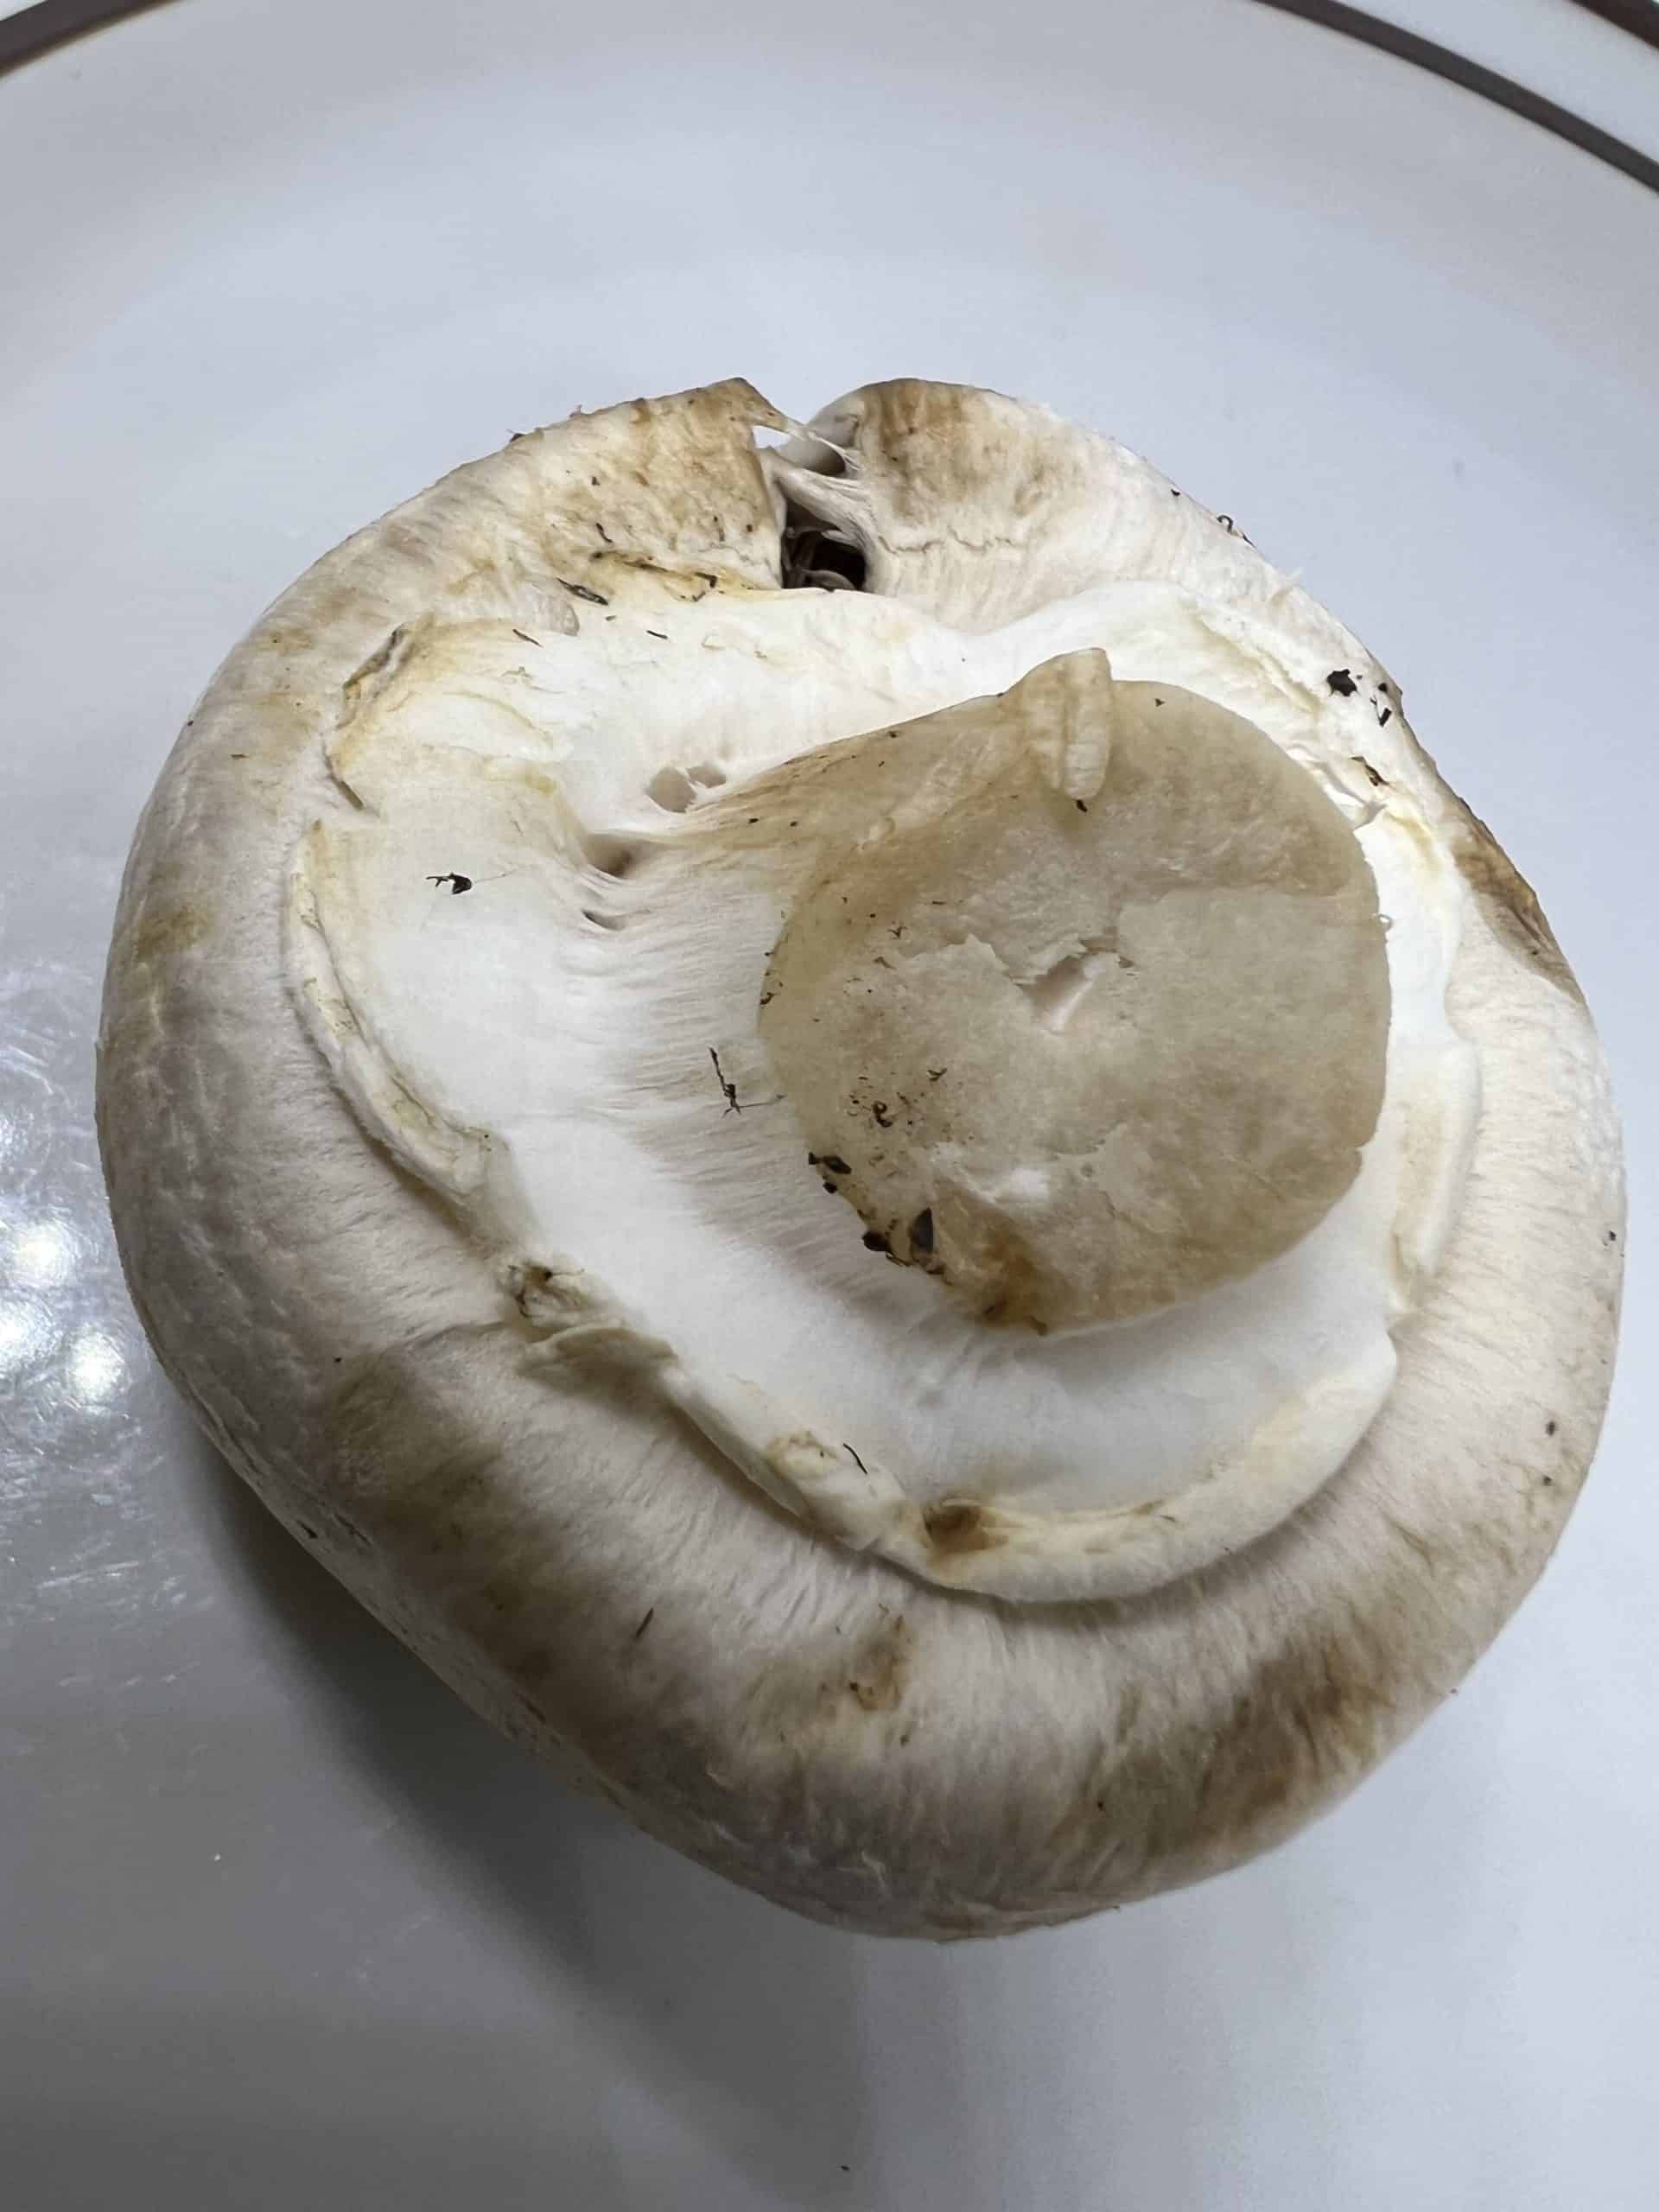 Prepacked mushrooms in a punnet covered with clear plastic